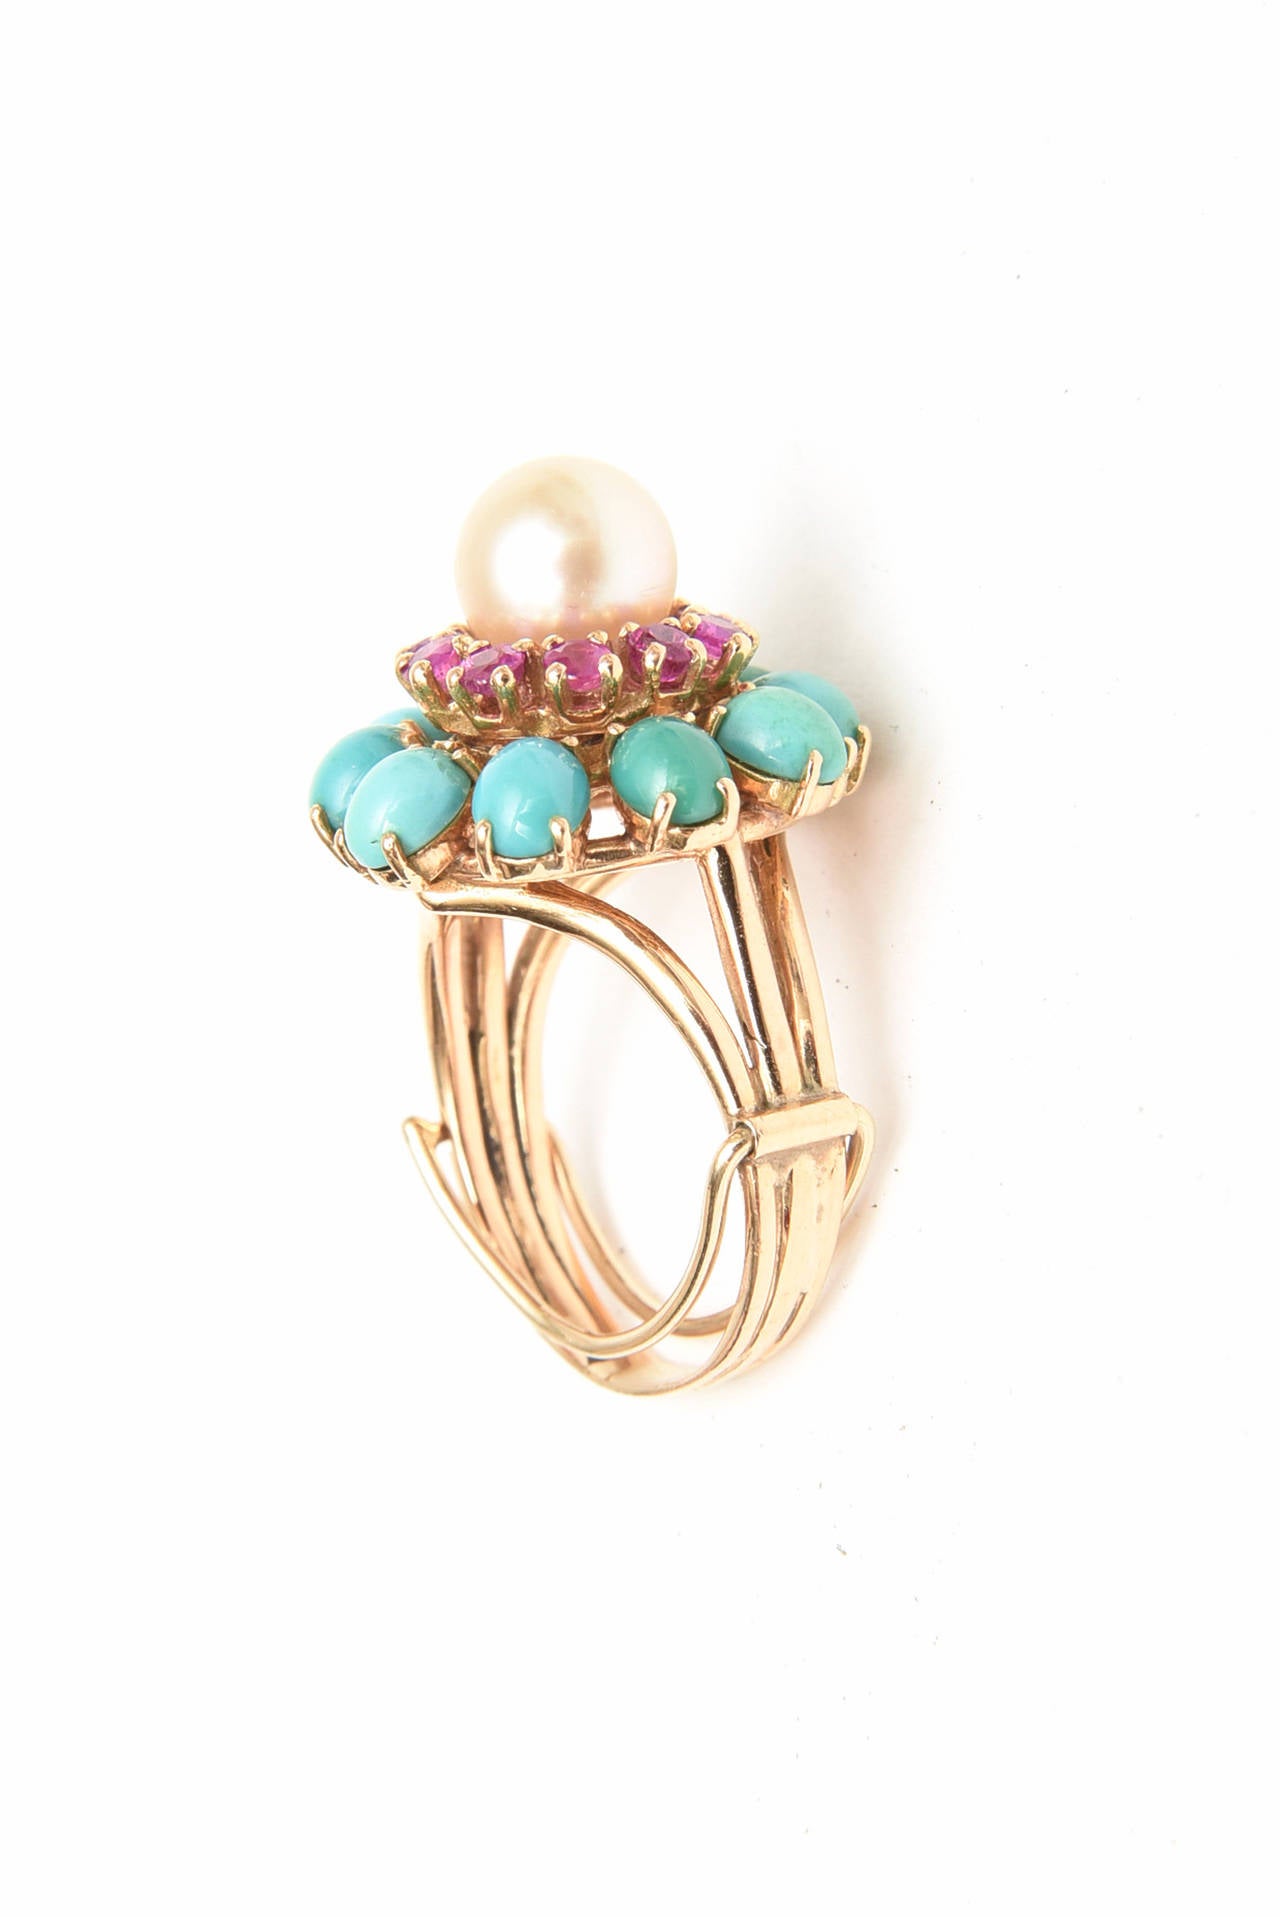 Modern  Pearl, Ruby, Turquoise and 14K Dome Cocktail Dome Ring Vintage